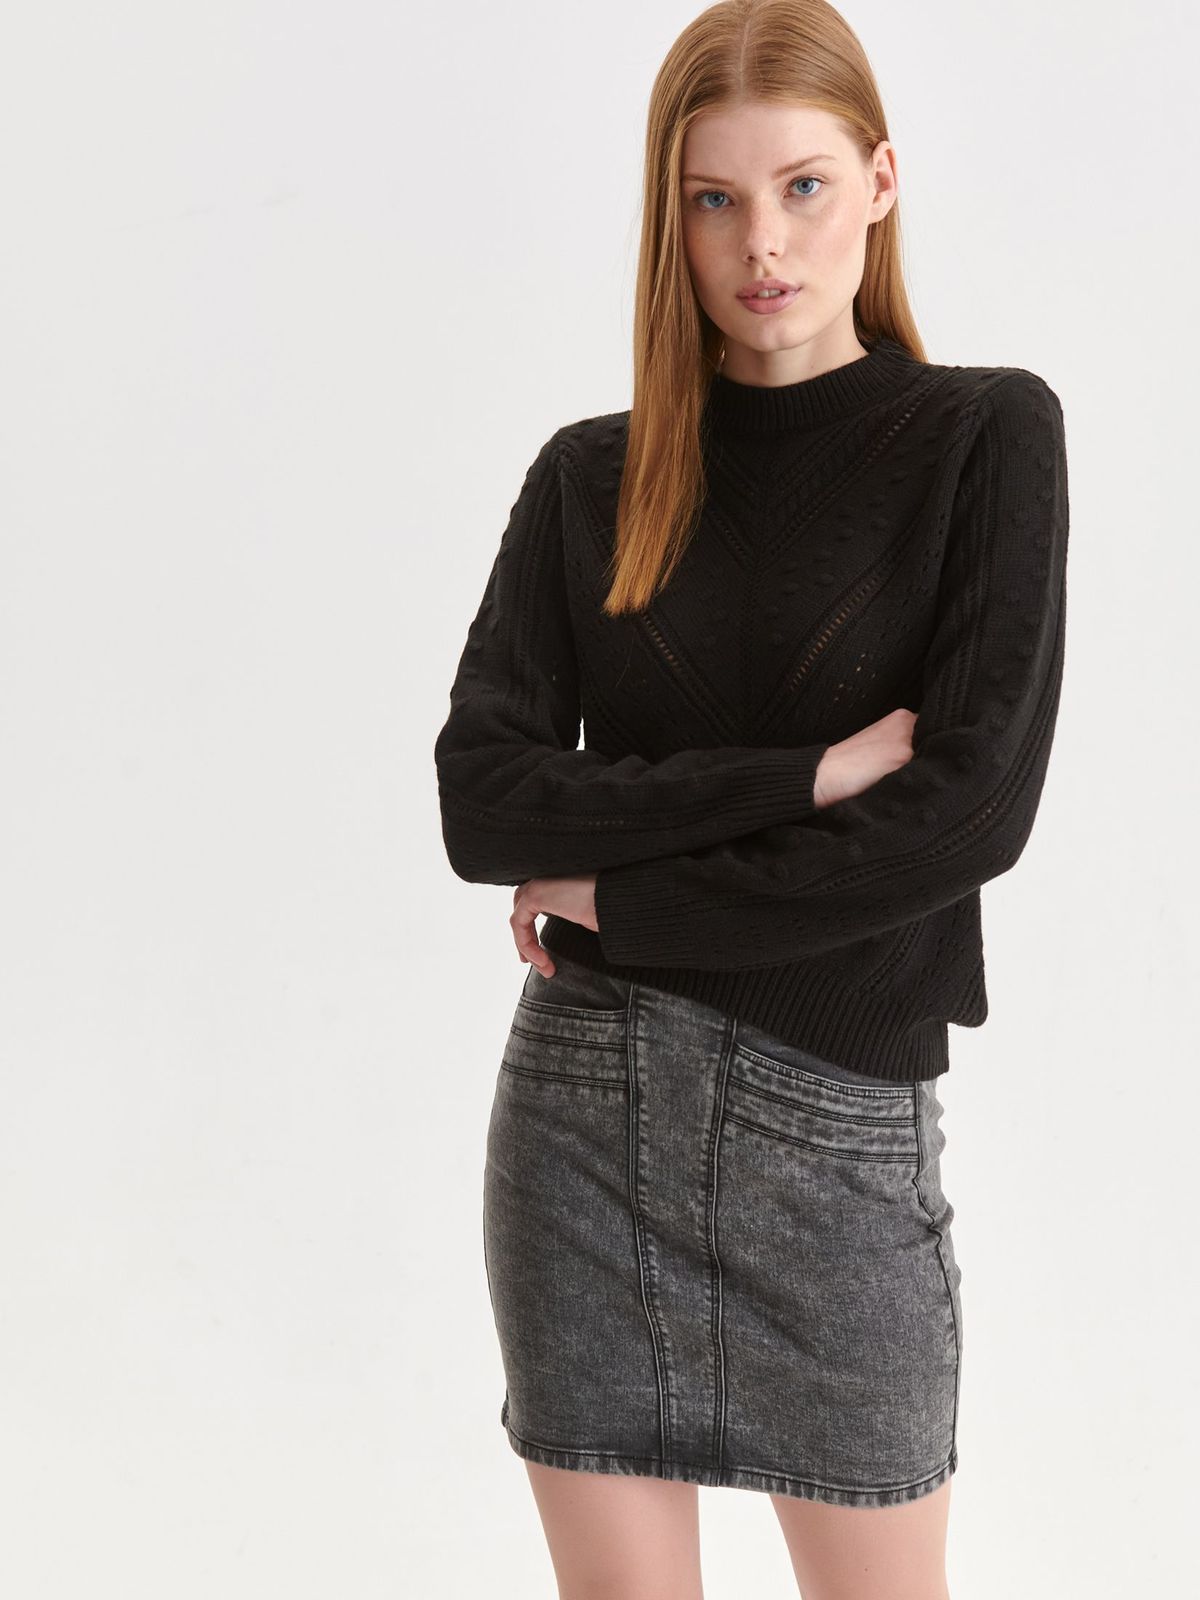 Black sweater knitted loose fit with weaving pattern 2 - StarShinerS.com